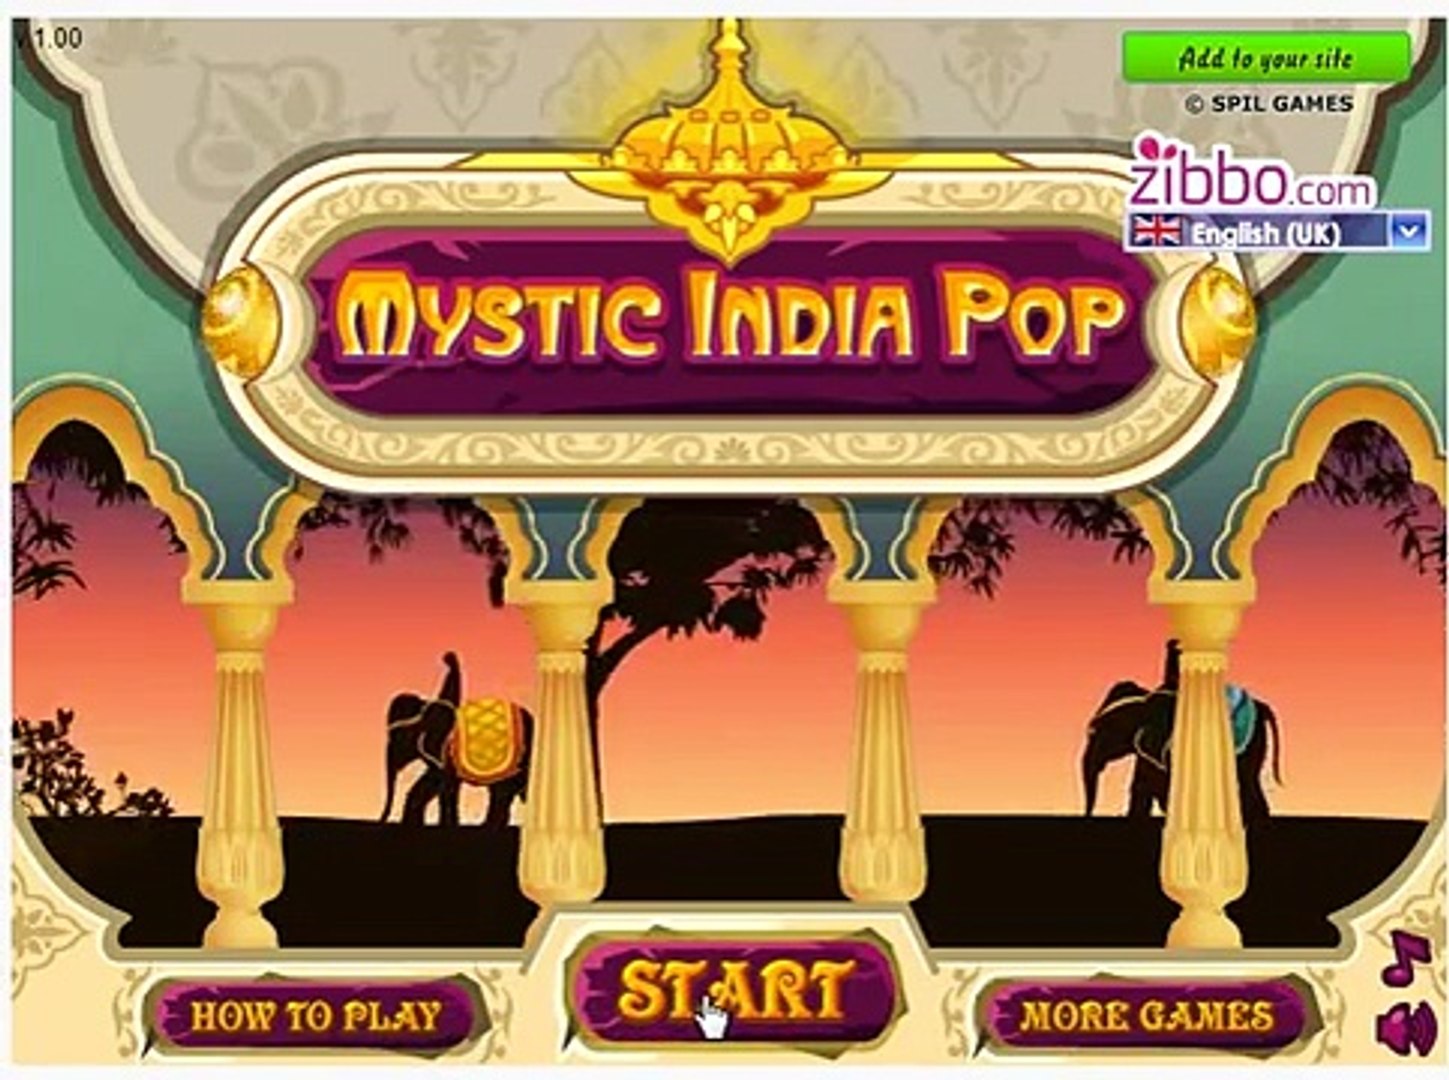 Mystic india pop game- Play free online game - Vidéo Dailymotion